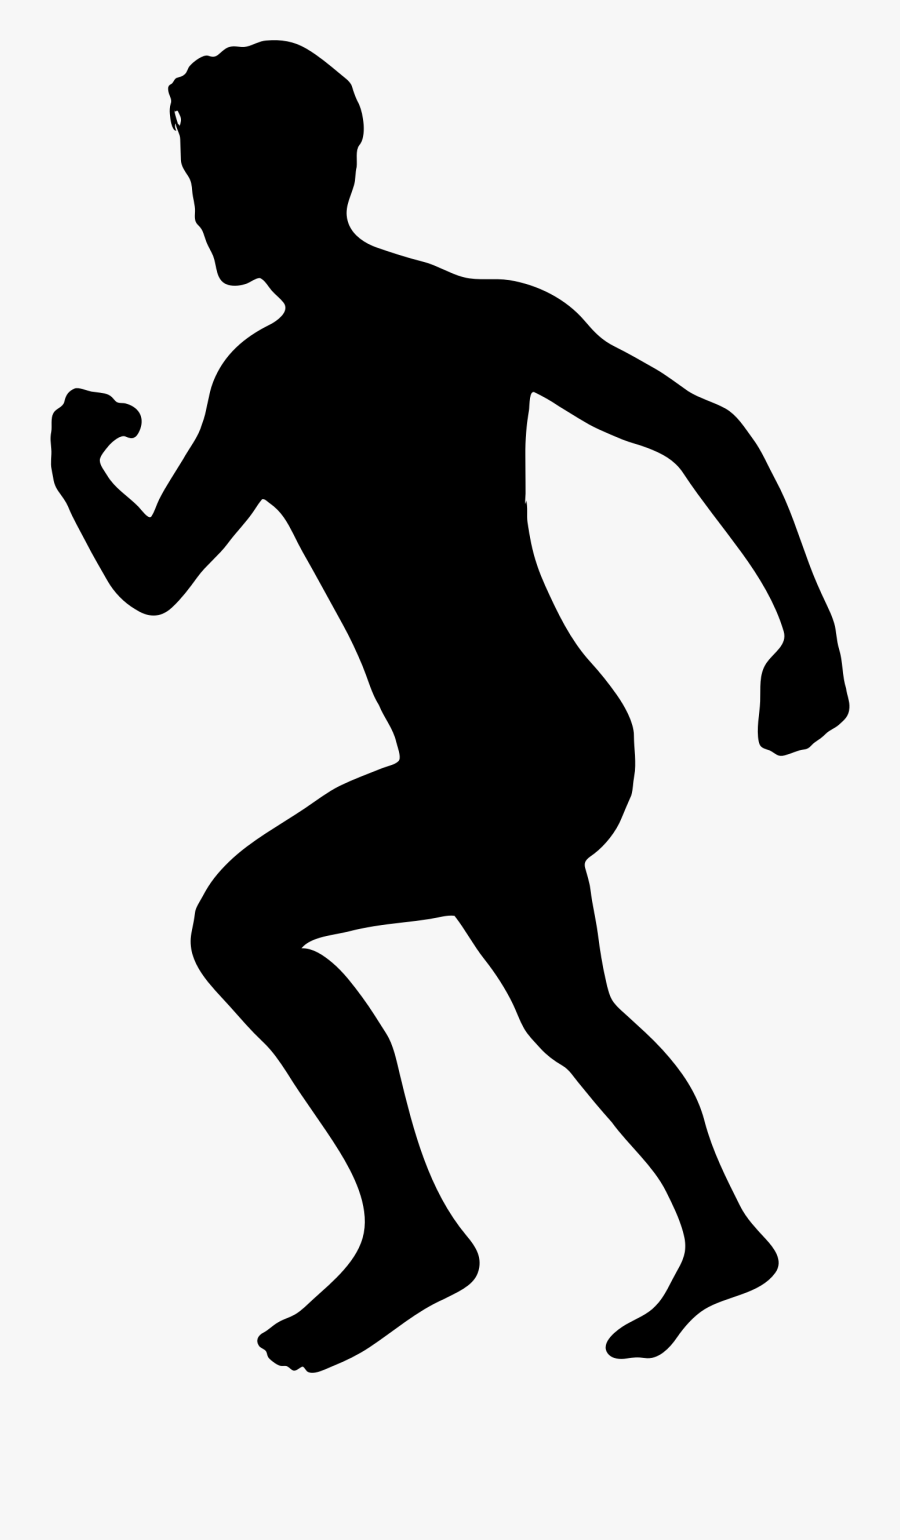 Free Clip Art Of Person Running Clipart The - Man Running Clip Art, Transparent Clipart